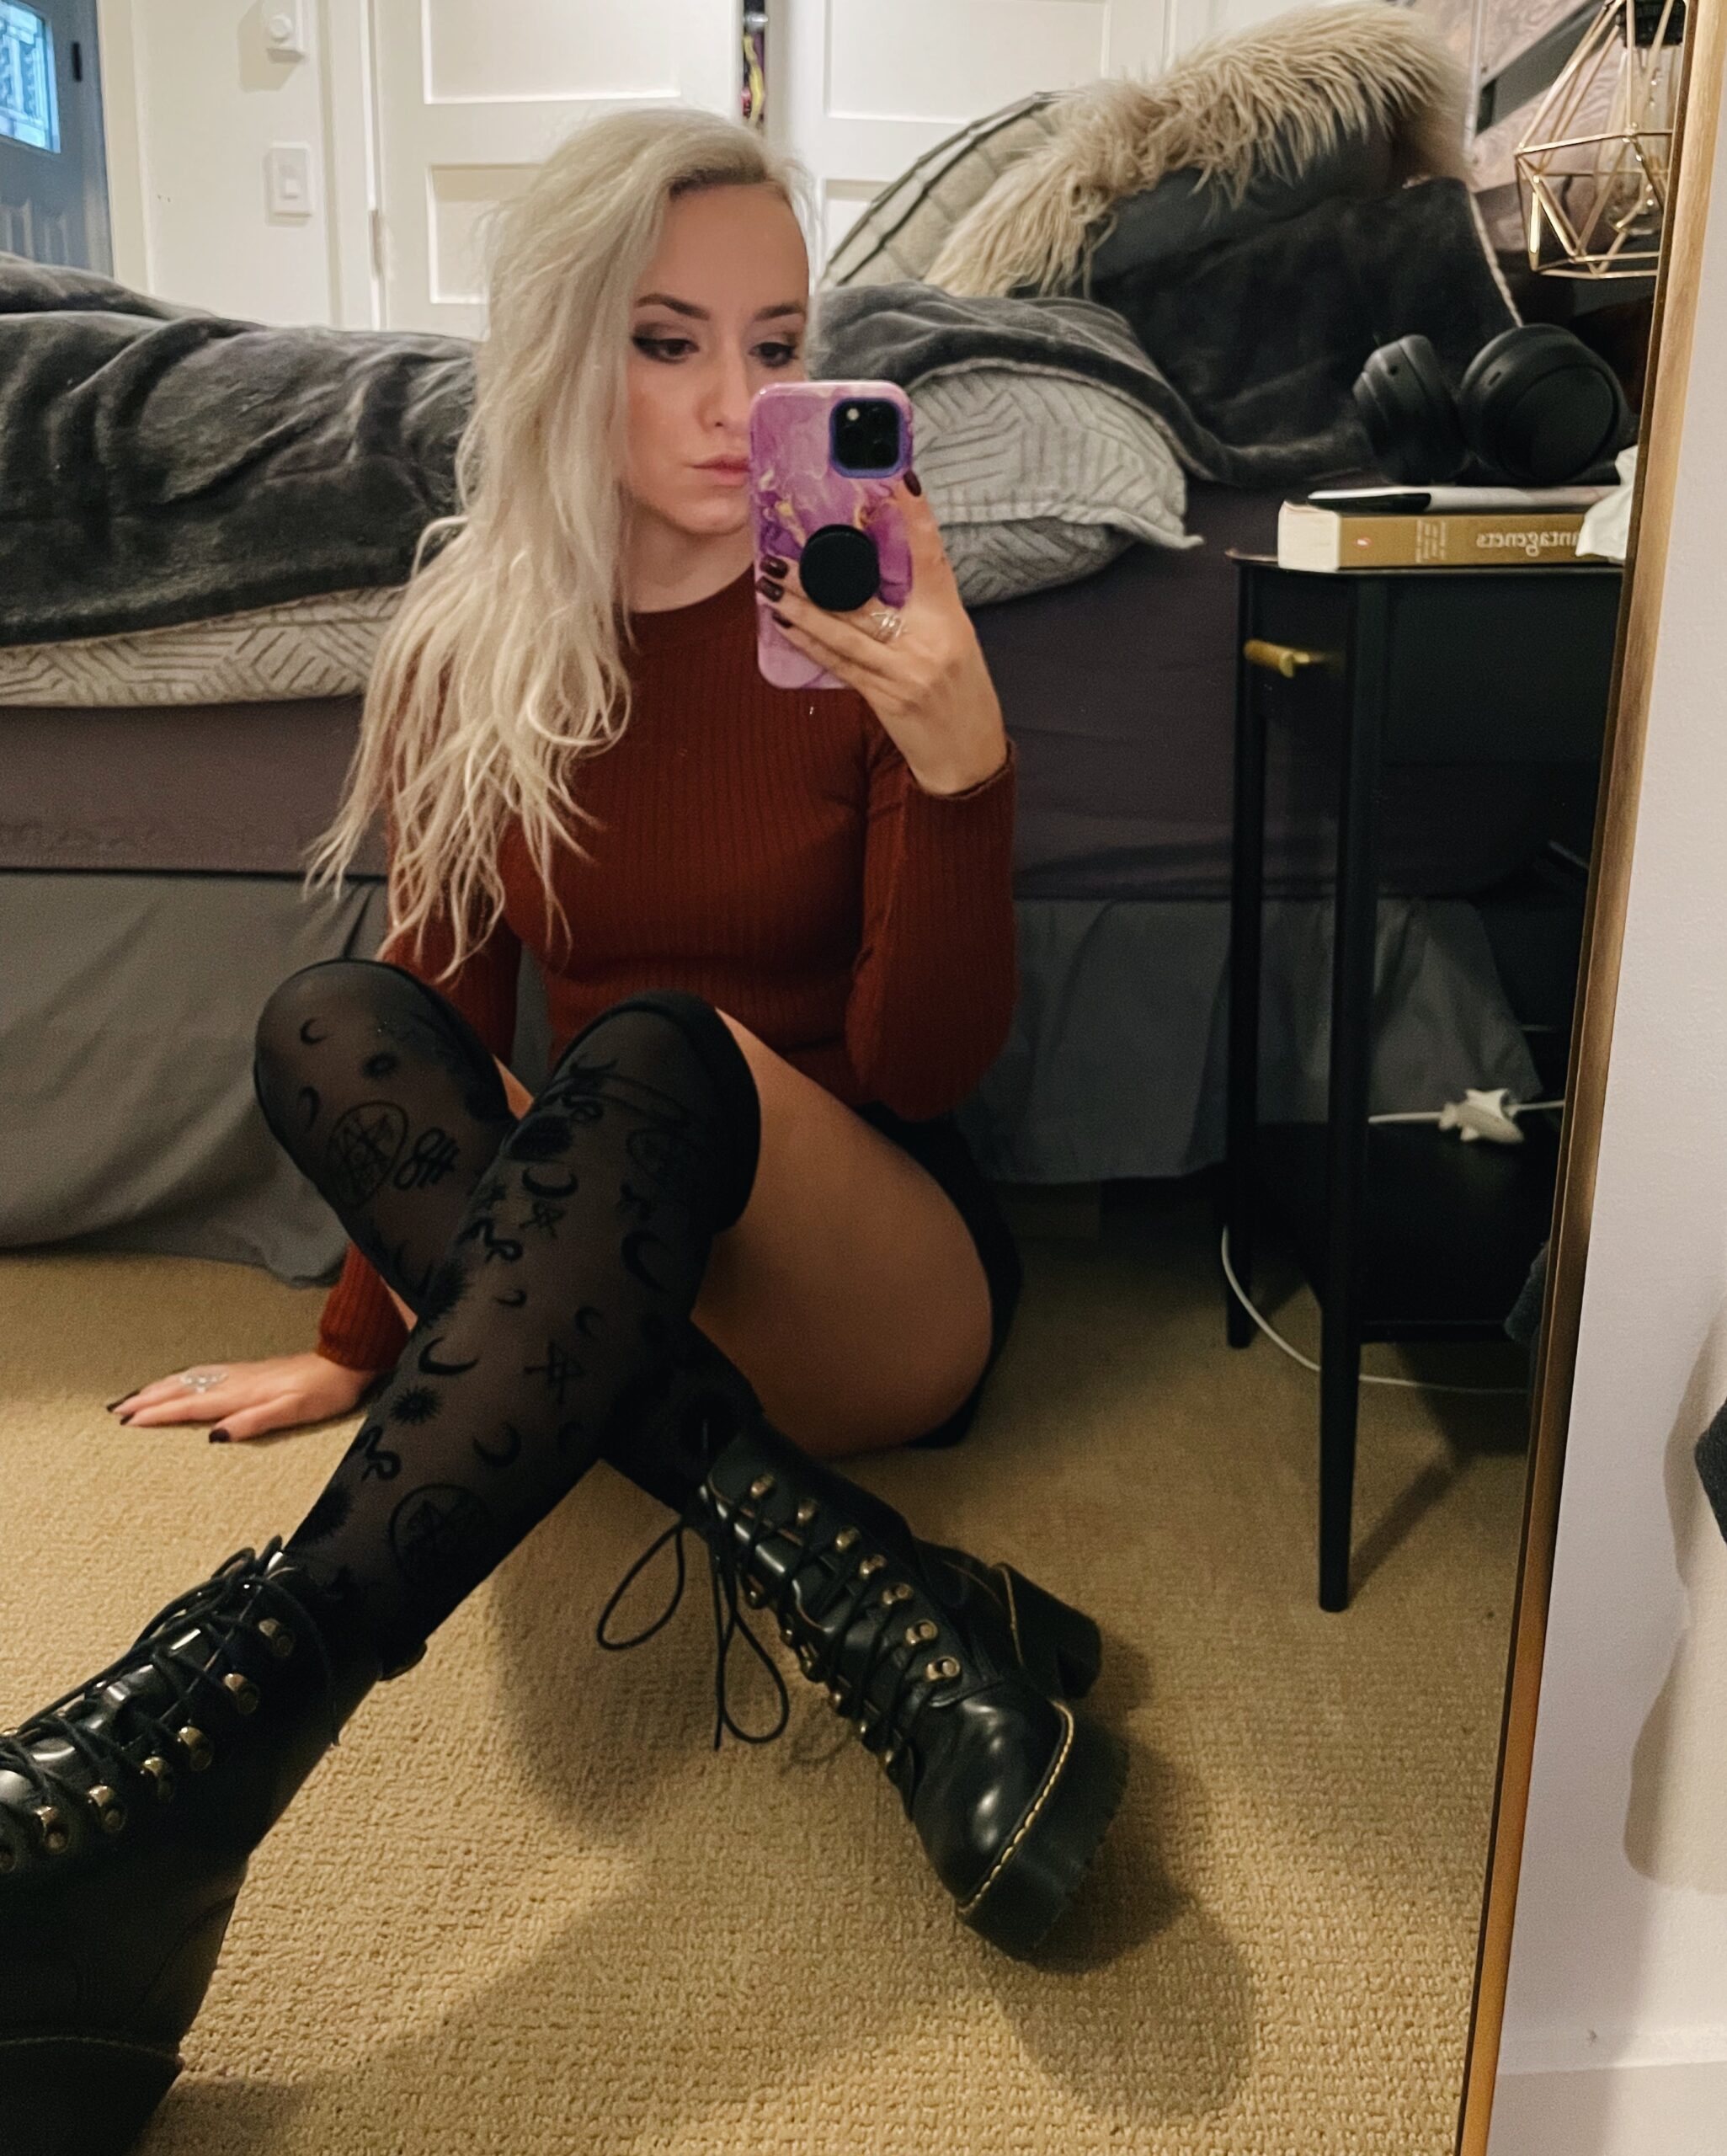 Blonde wearing a fall outfit, burnt orange top and sheer knee high boots